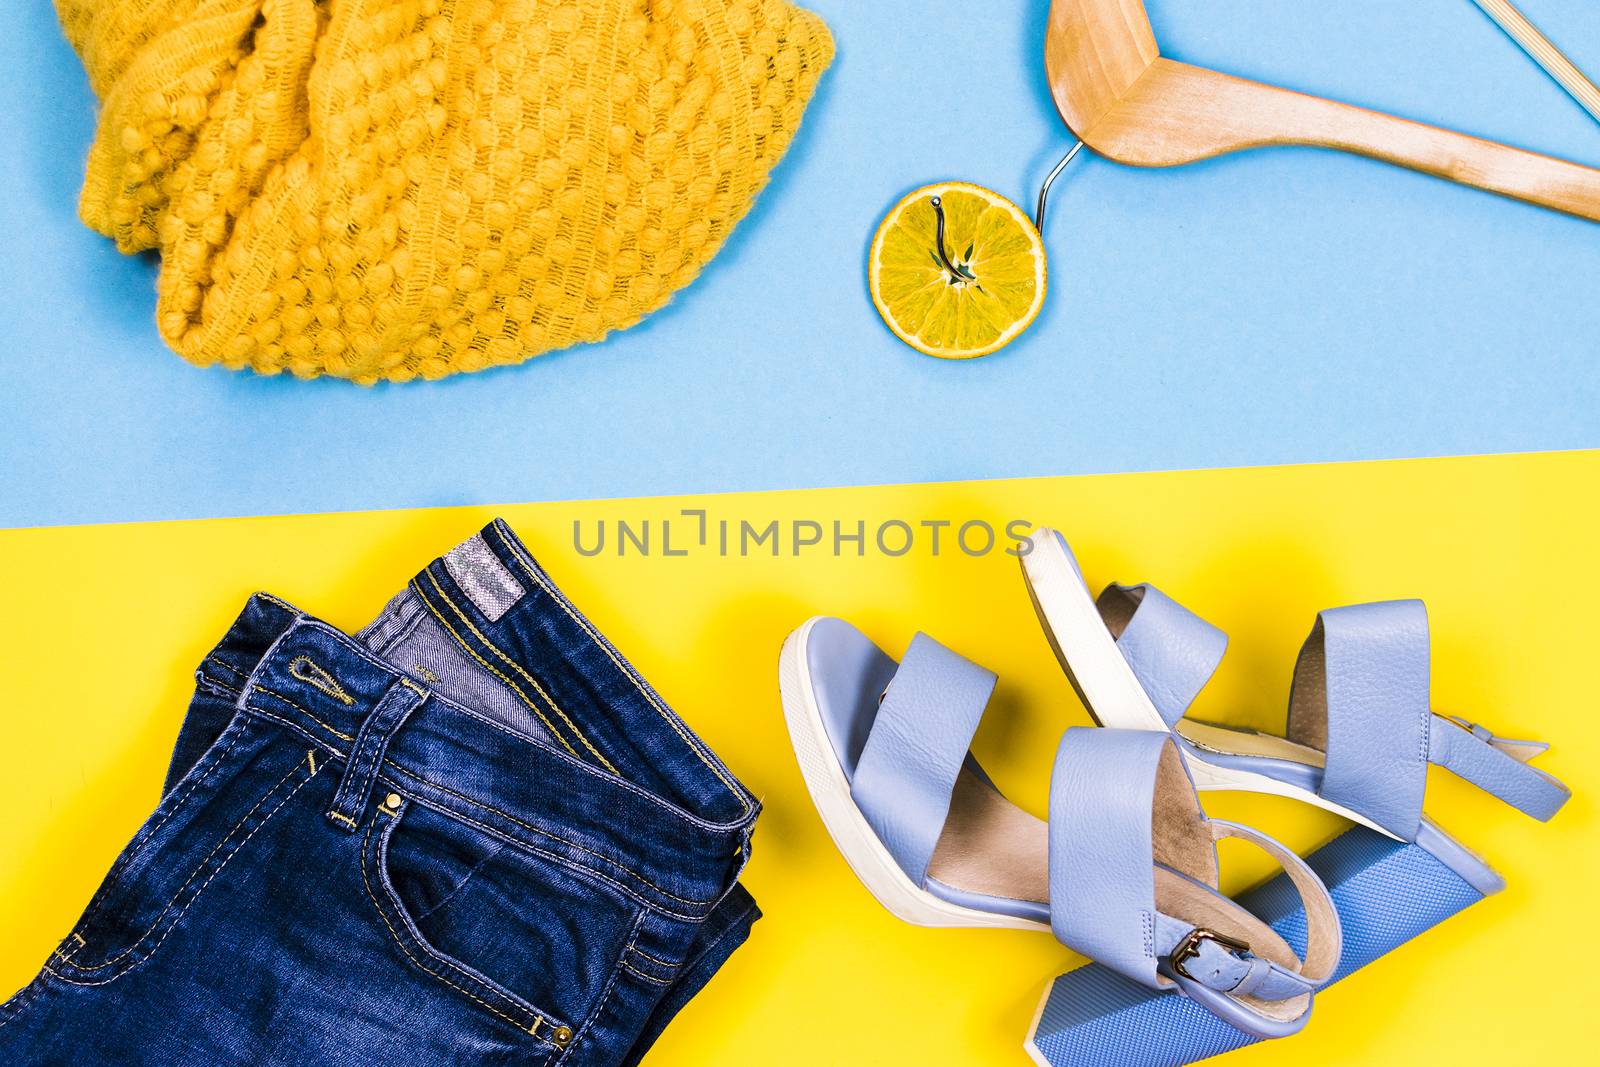 Women's clothing on a colored background